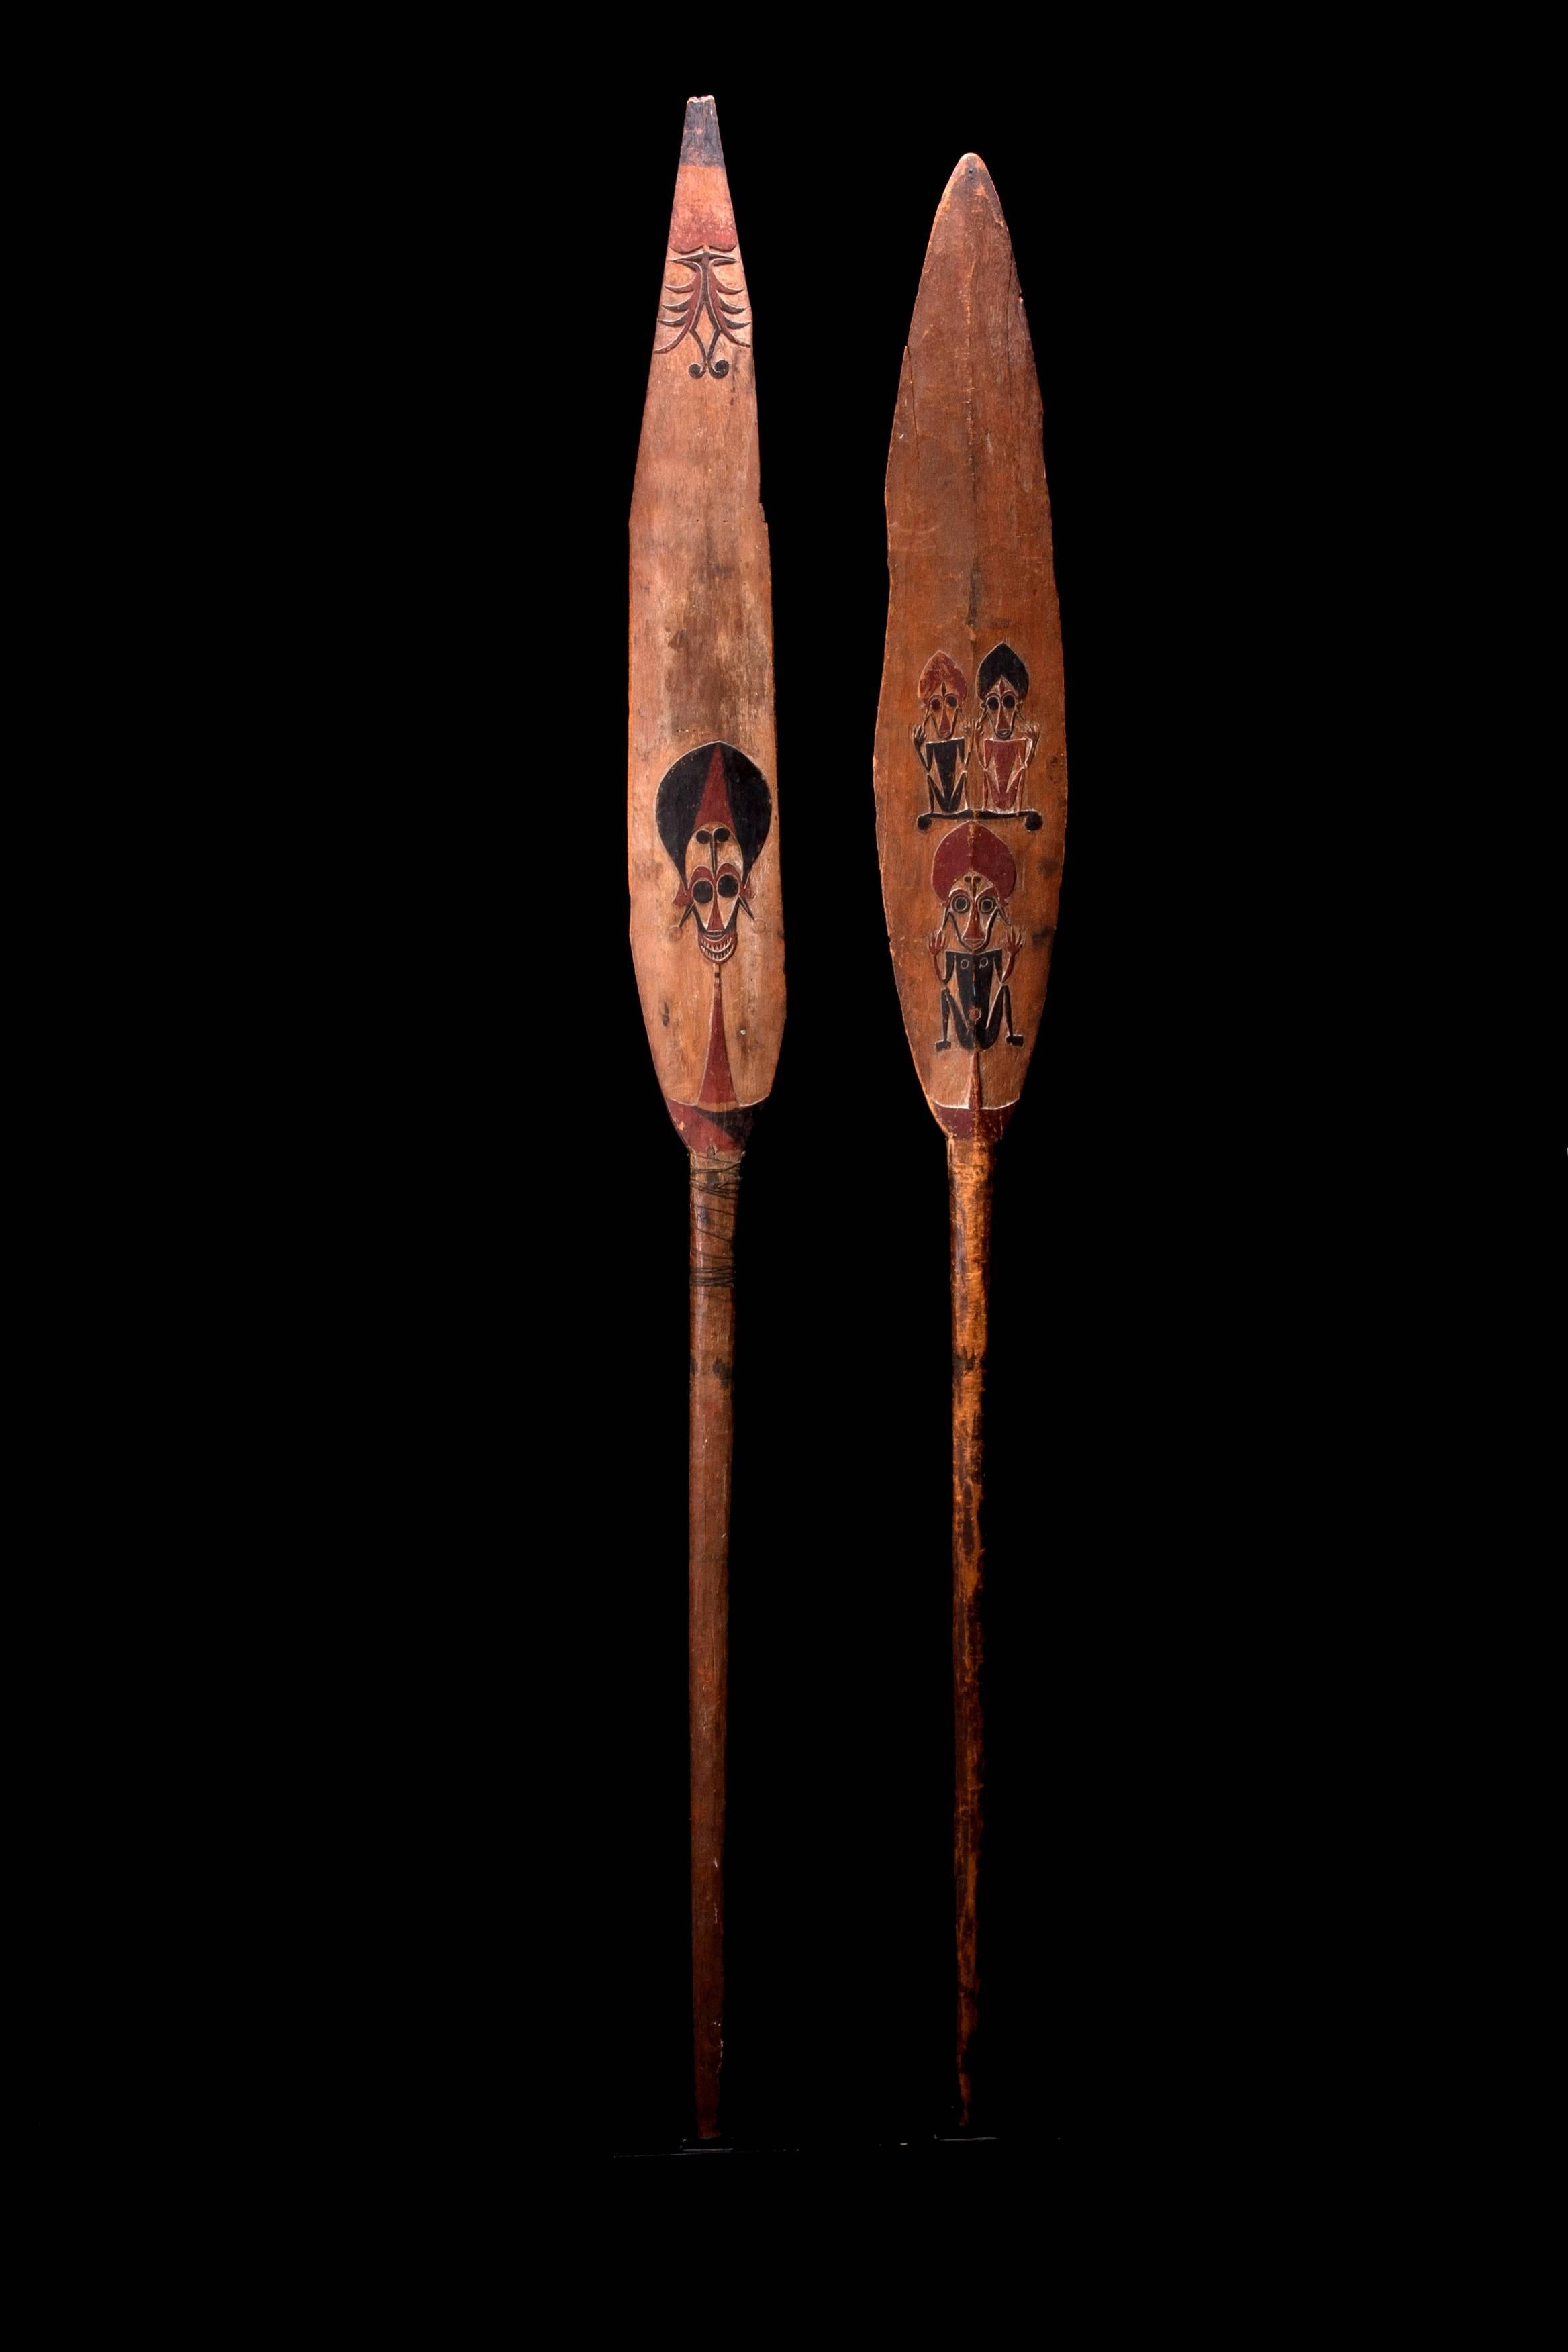 Two paddles with flat, long, lentoid blades and central raised ridges, with long handles or flattened ovoid form. The shorter paddle is adorned with three relief squatting “Kokorra”, the powerful iconic spirits associated with the men’s secret